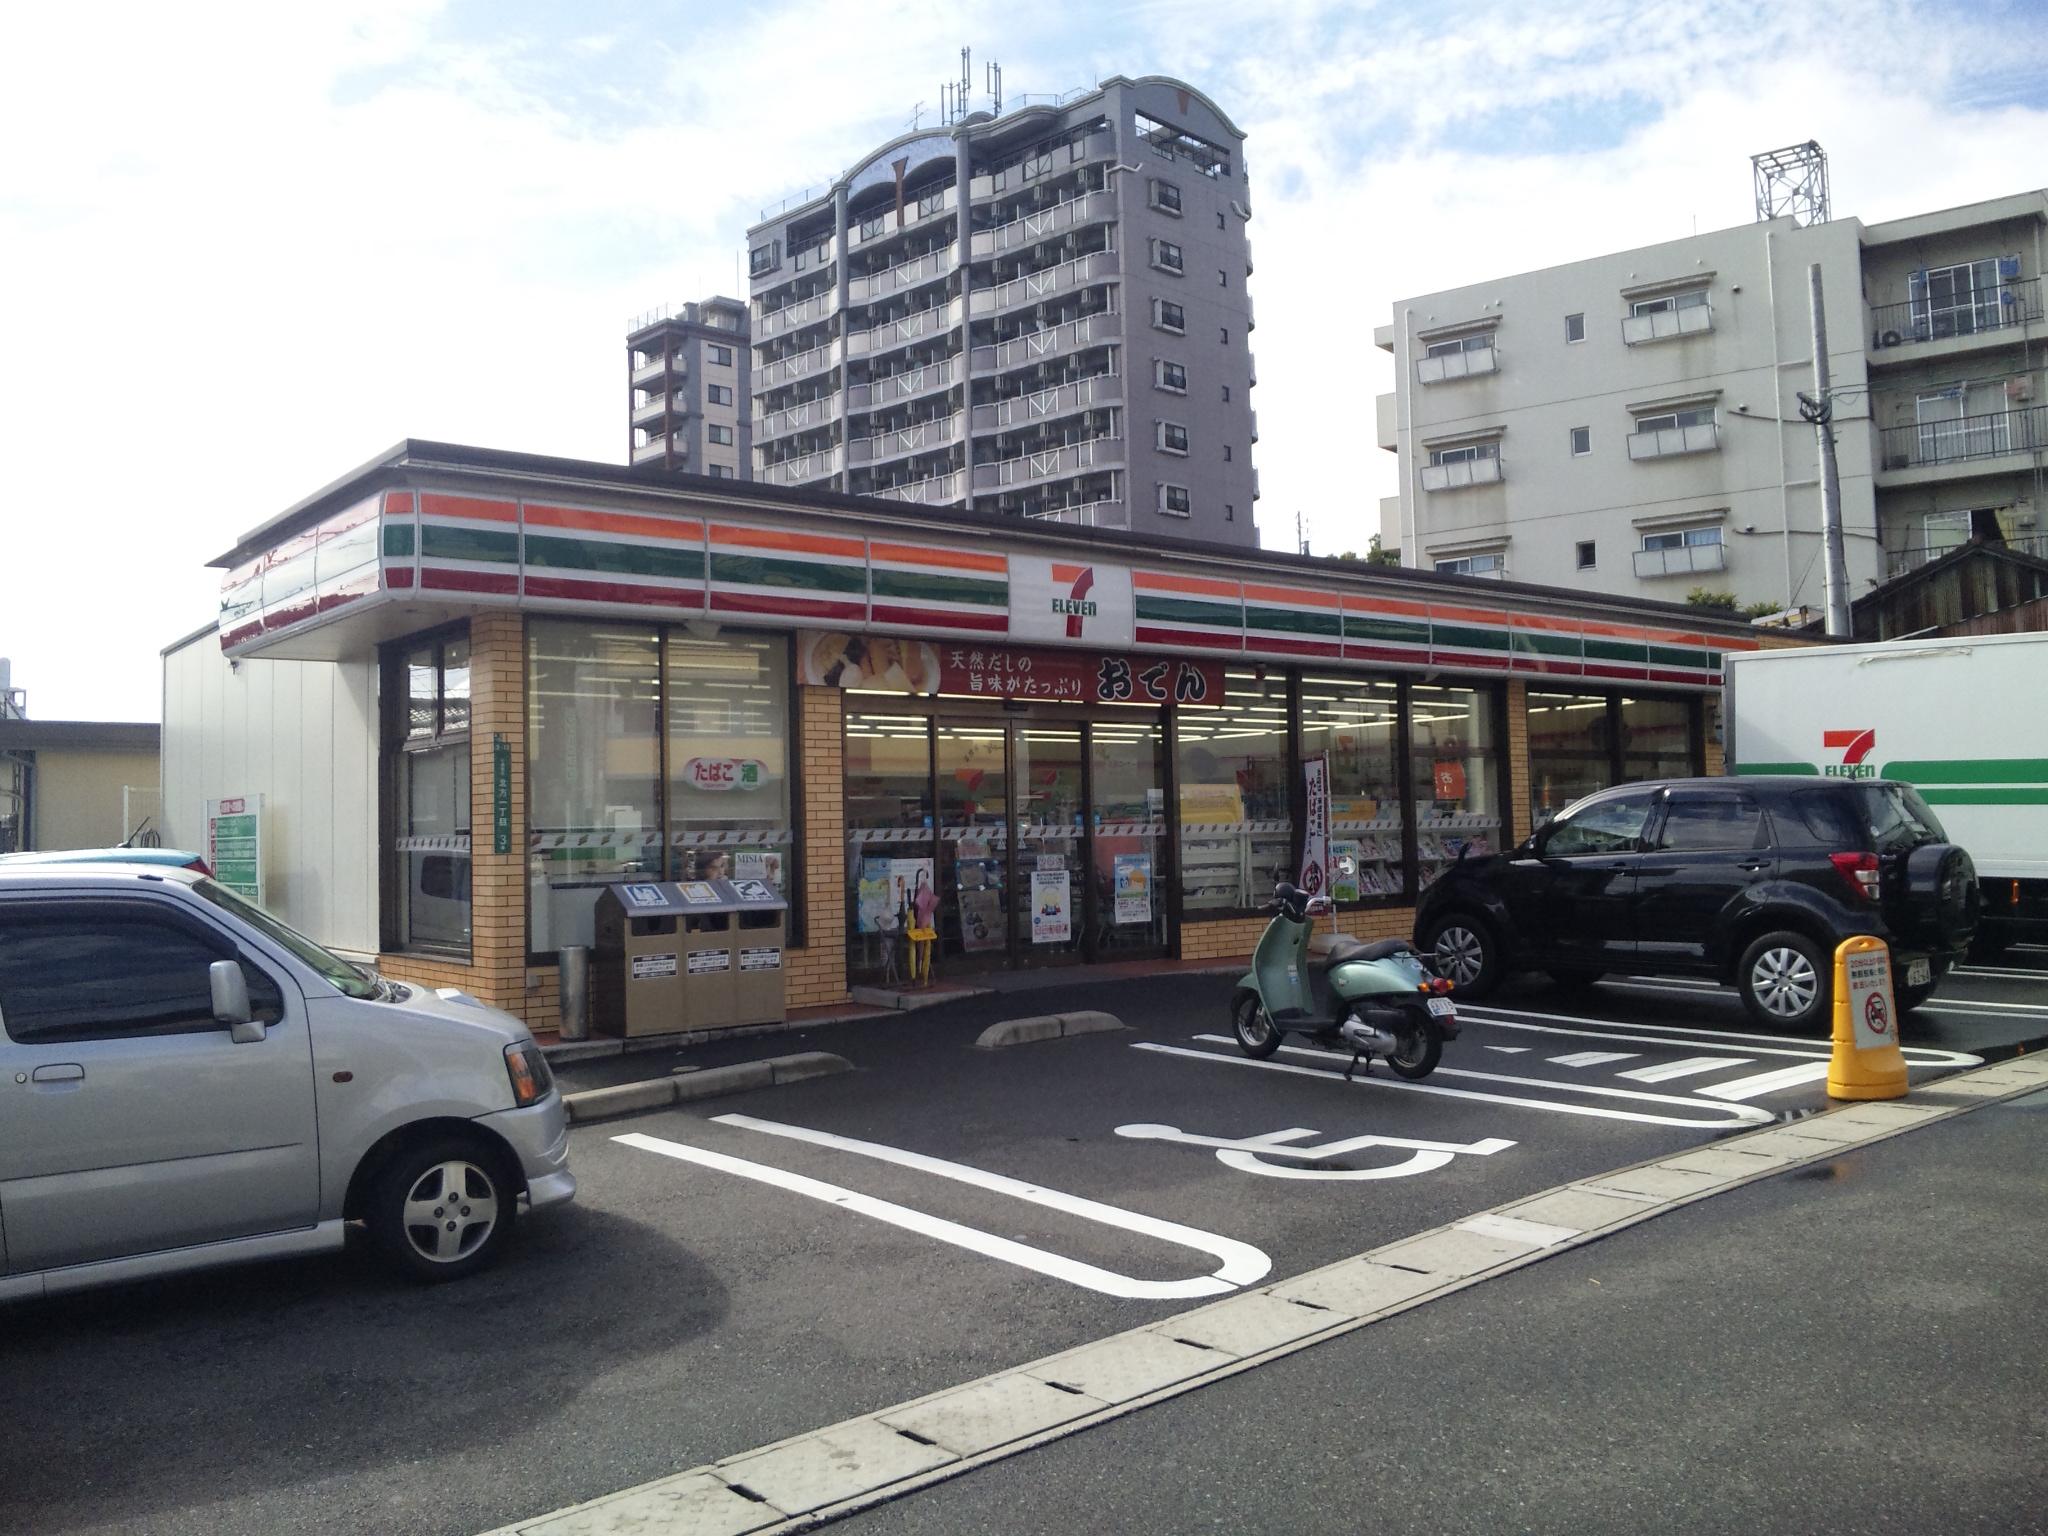 Convenience store. Seven-Eleven Kokura how 1-chome to (convenience store) 576m